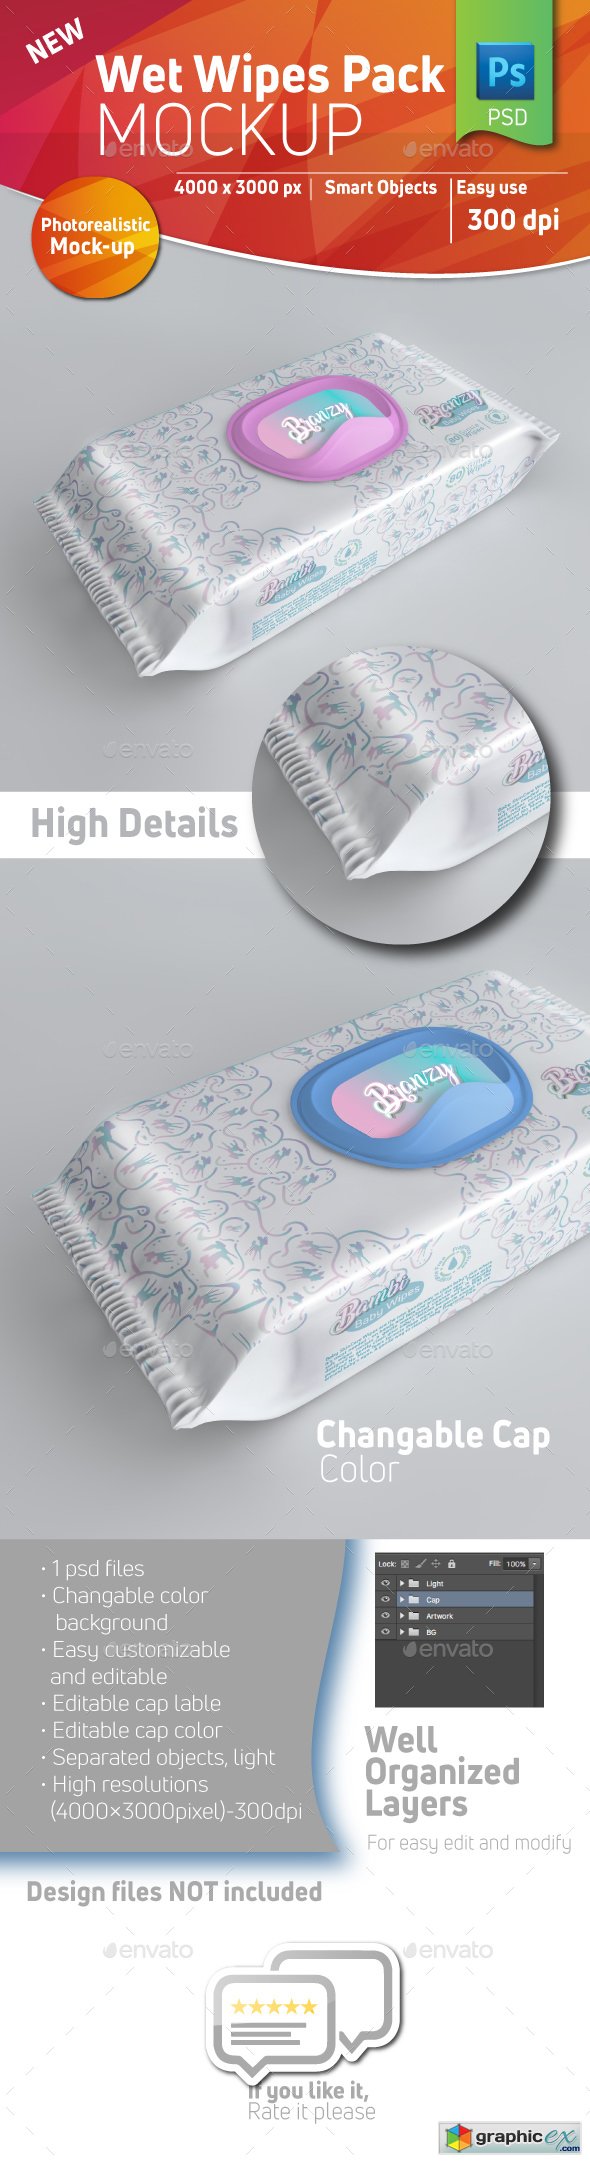 Baby Wet Wipes Pack Mockup With Plastic Cap